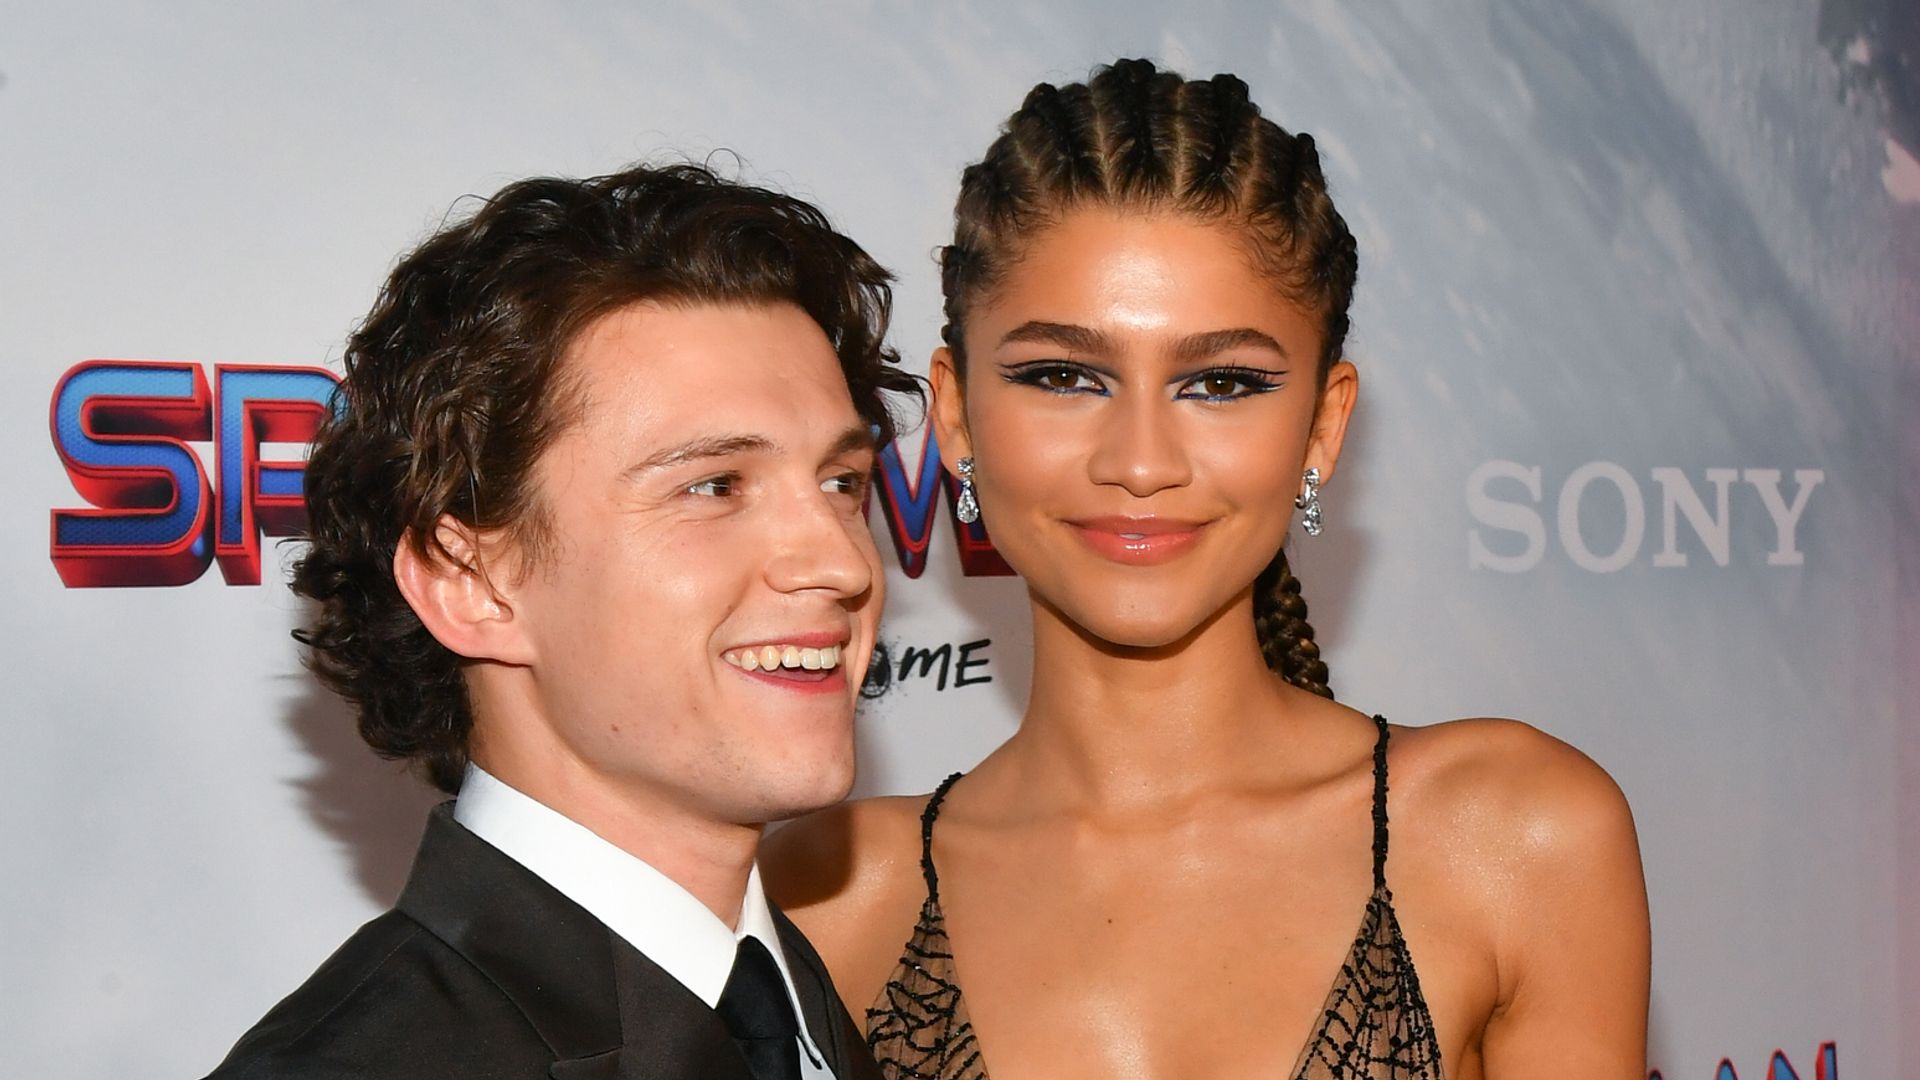 Zendaya and Tom Holland‘s families approve of their relationship